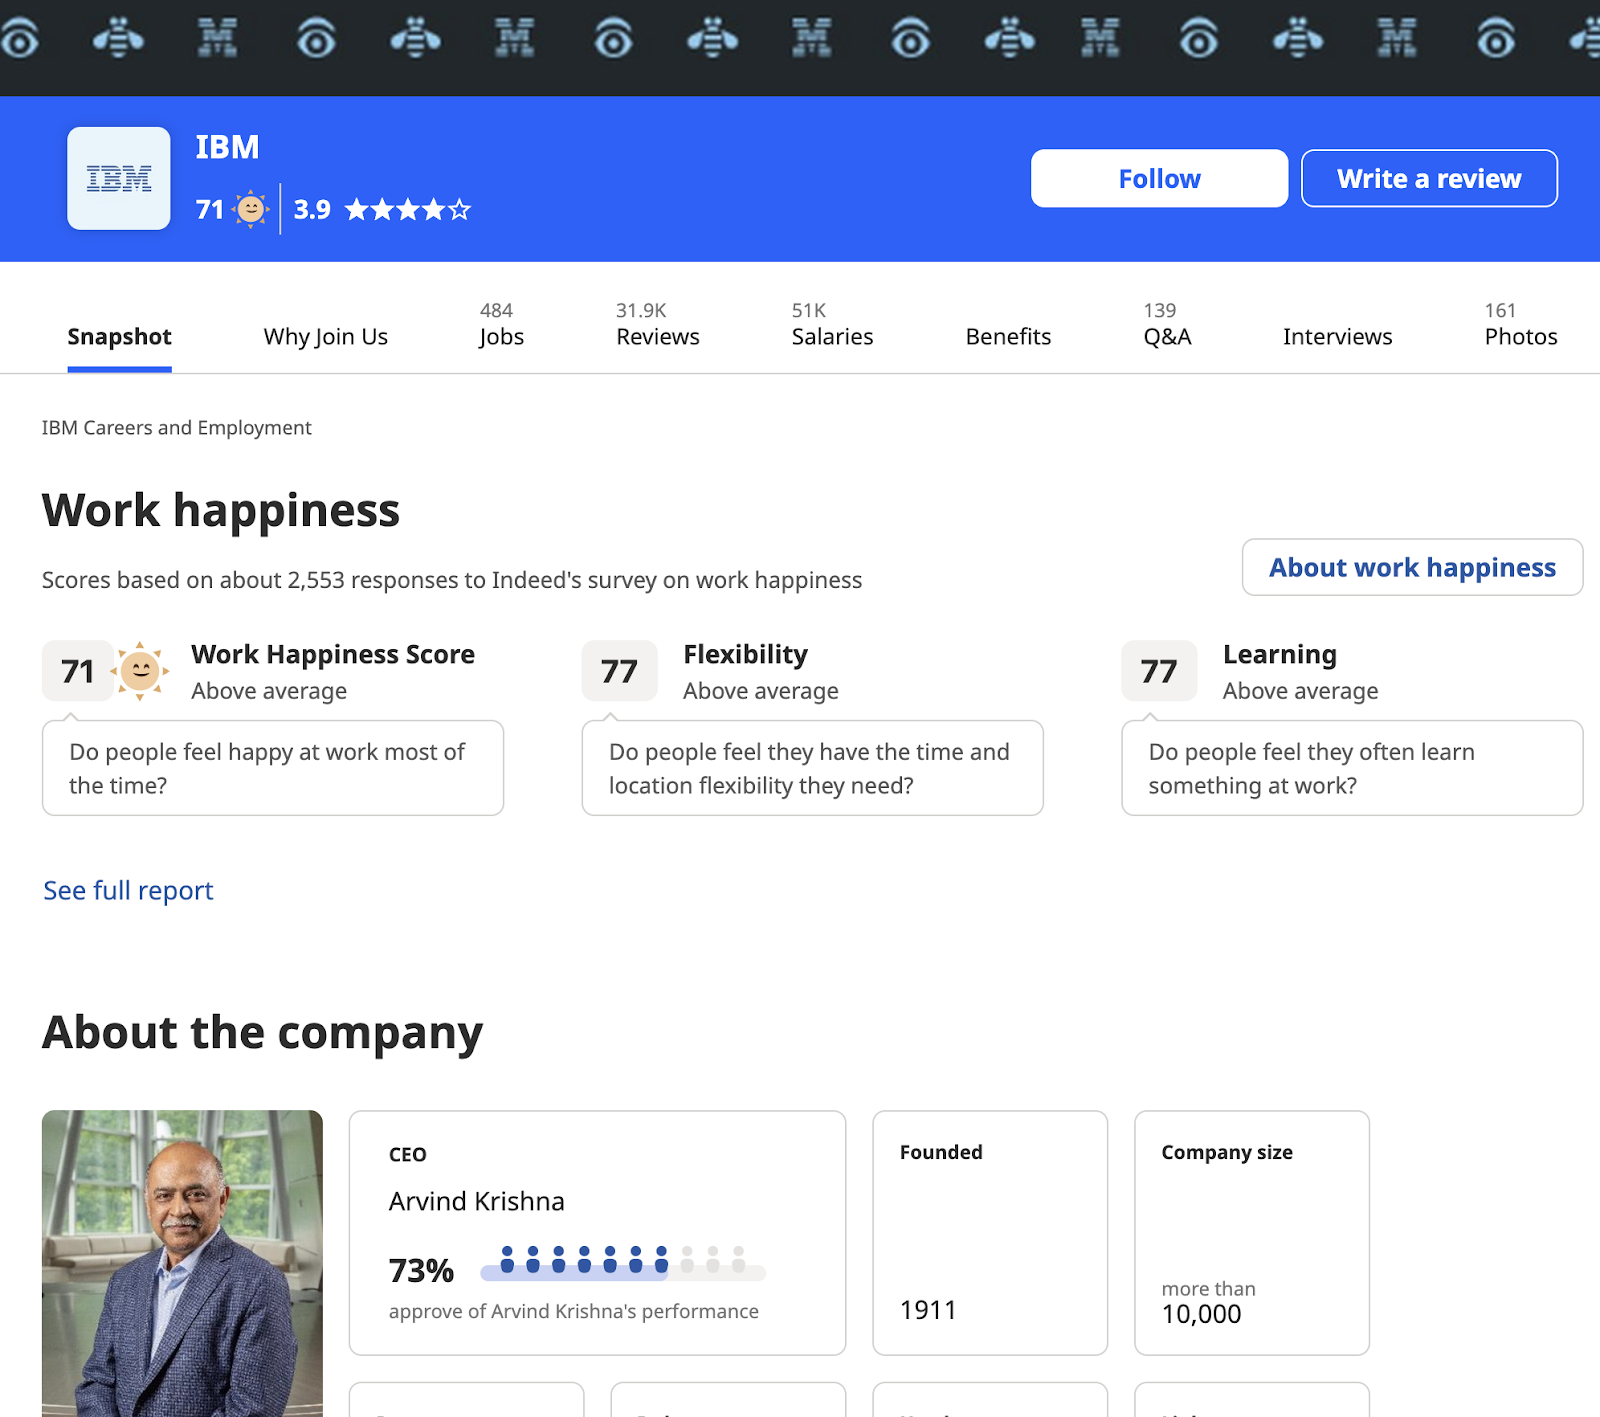 Companies can claim and stylize their own company page on Indeed to provide job seekers a place to learn and engage with their business before applying to an open role.